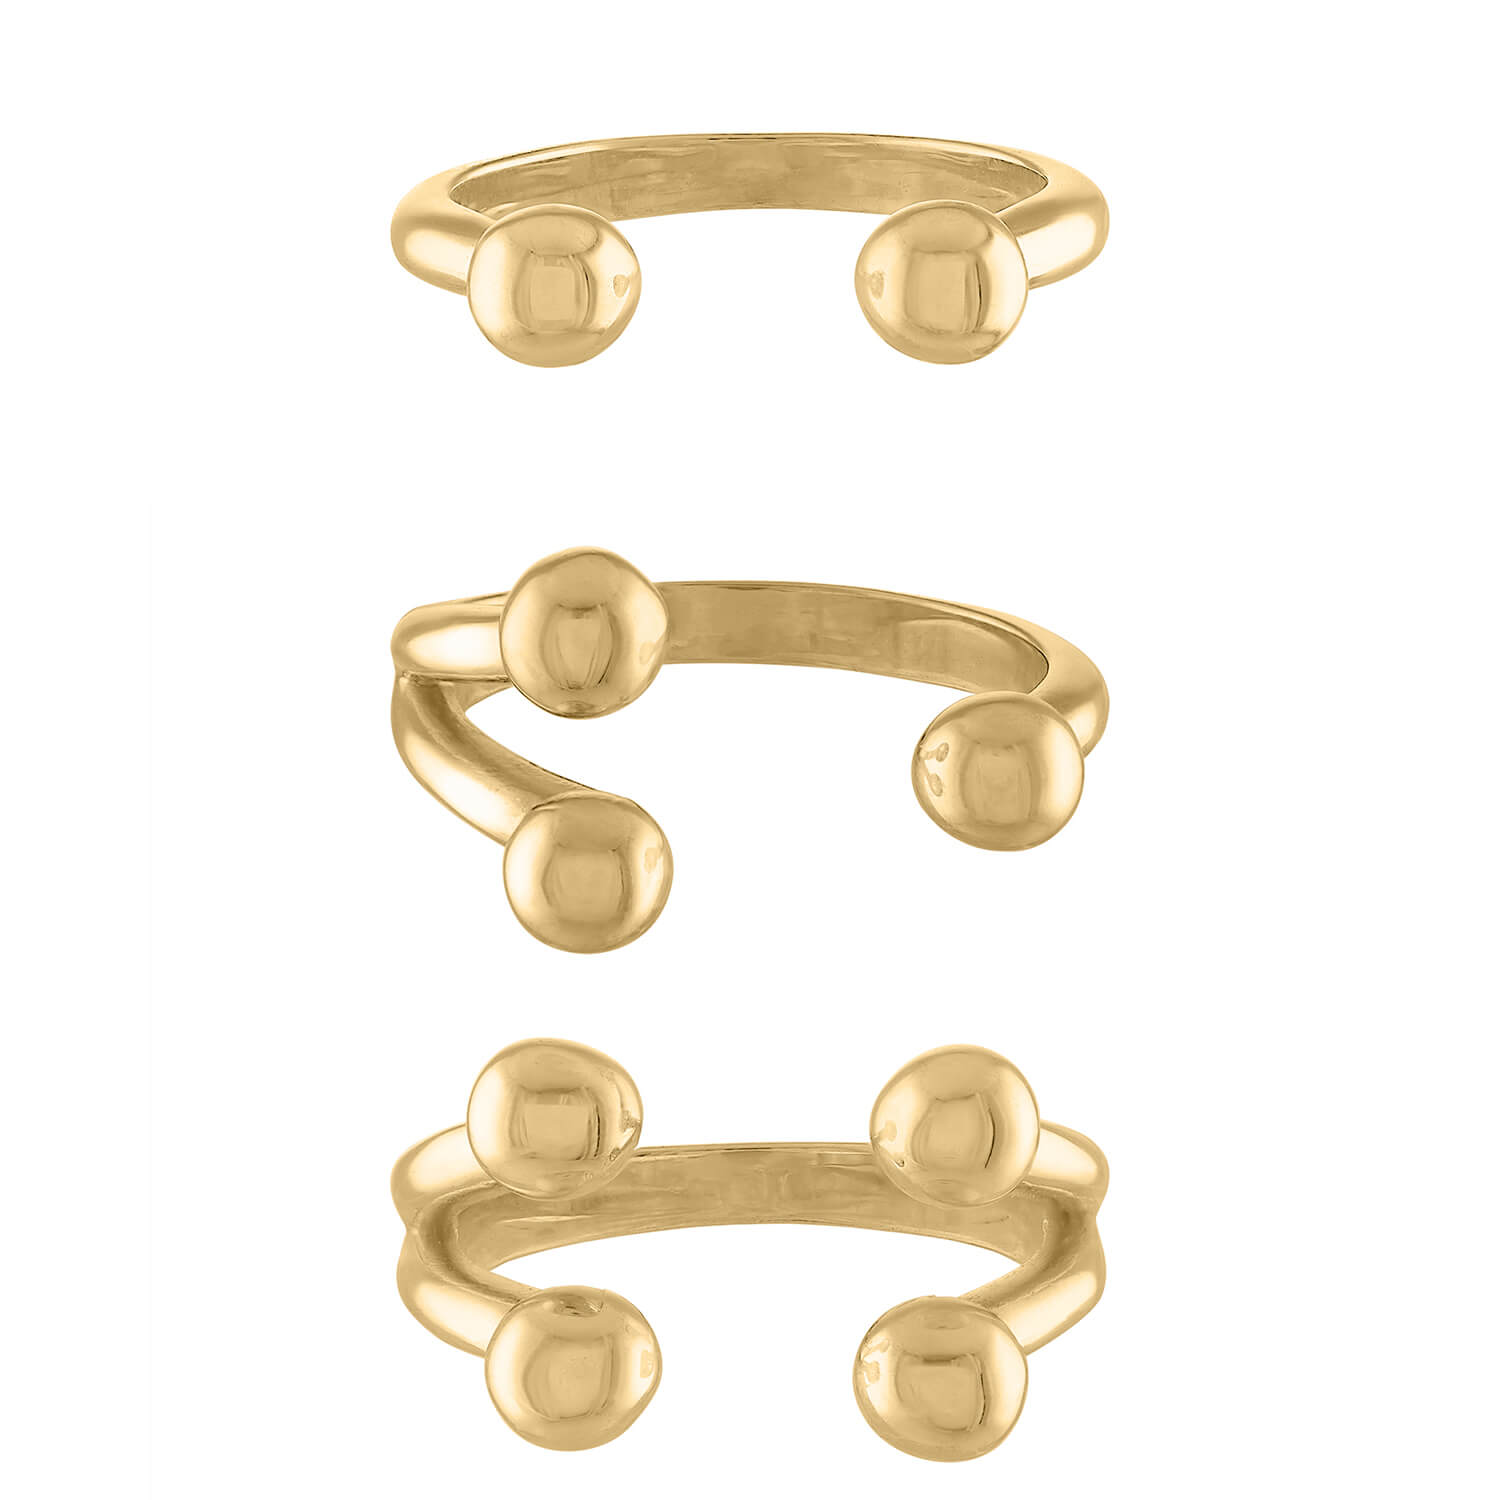 Floating Sphere Stacking Ring Trio in Gold